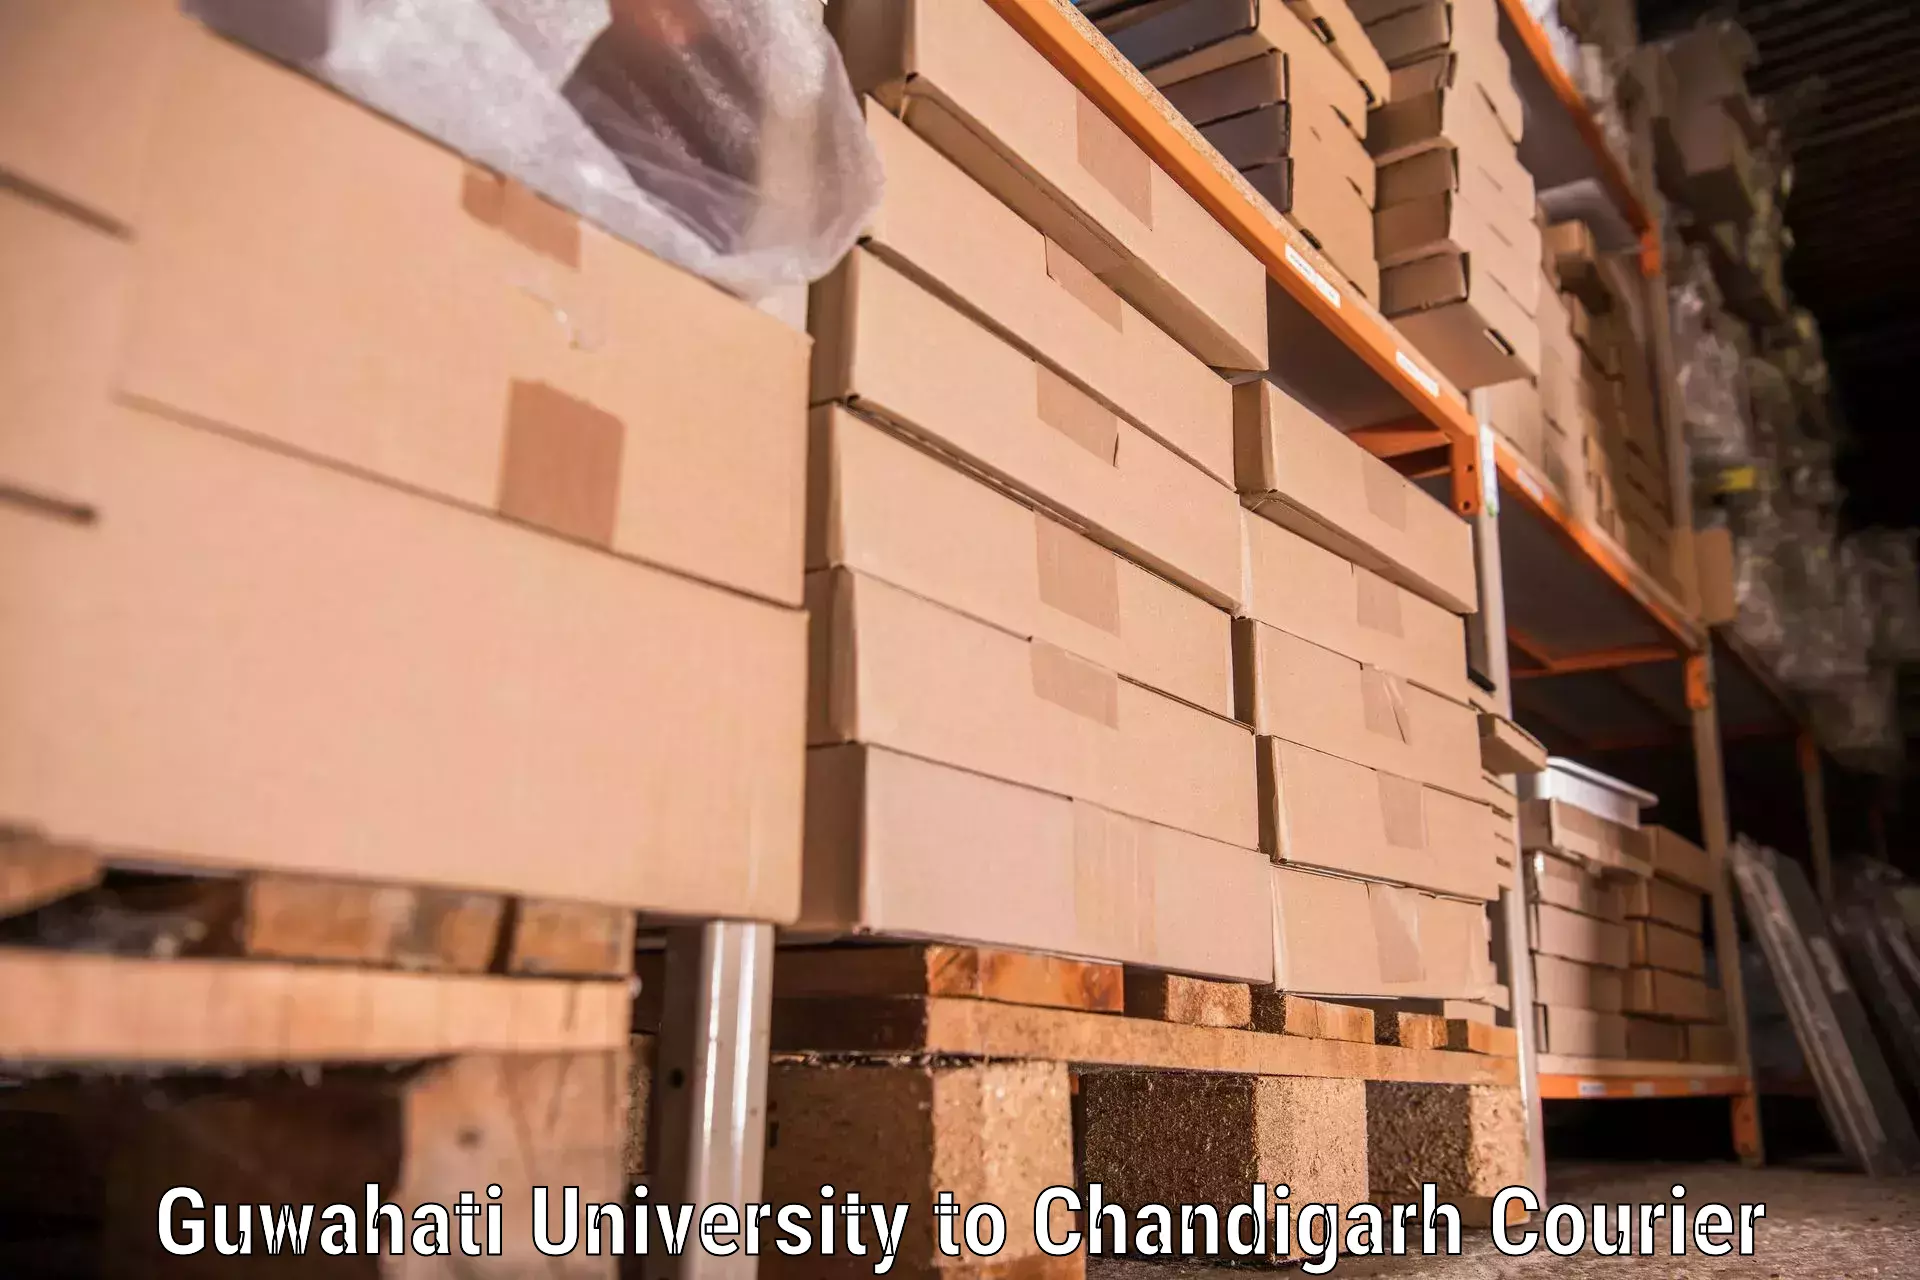 Tailored moving packages in Guwahati University to Panjab University Chandigarh